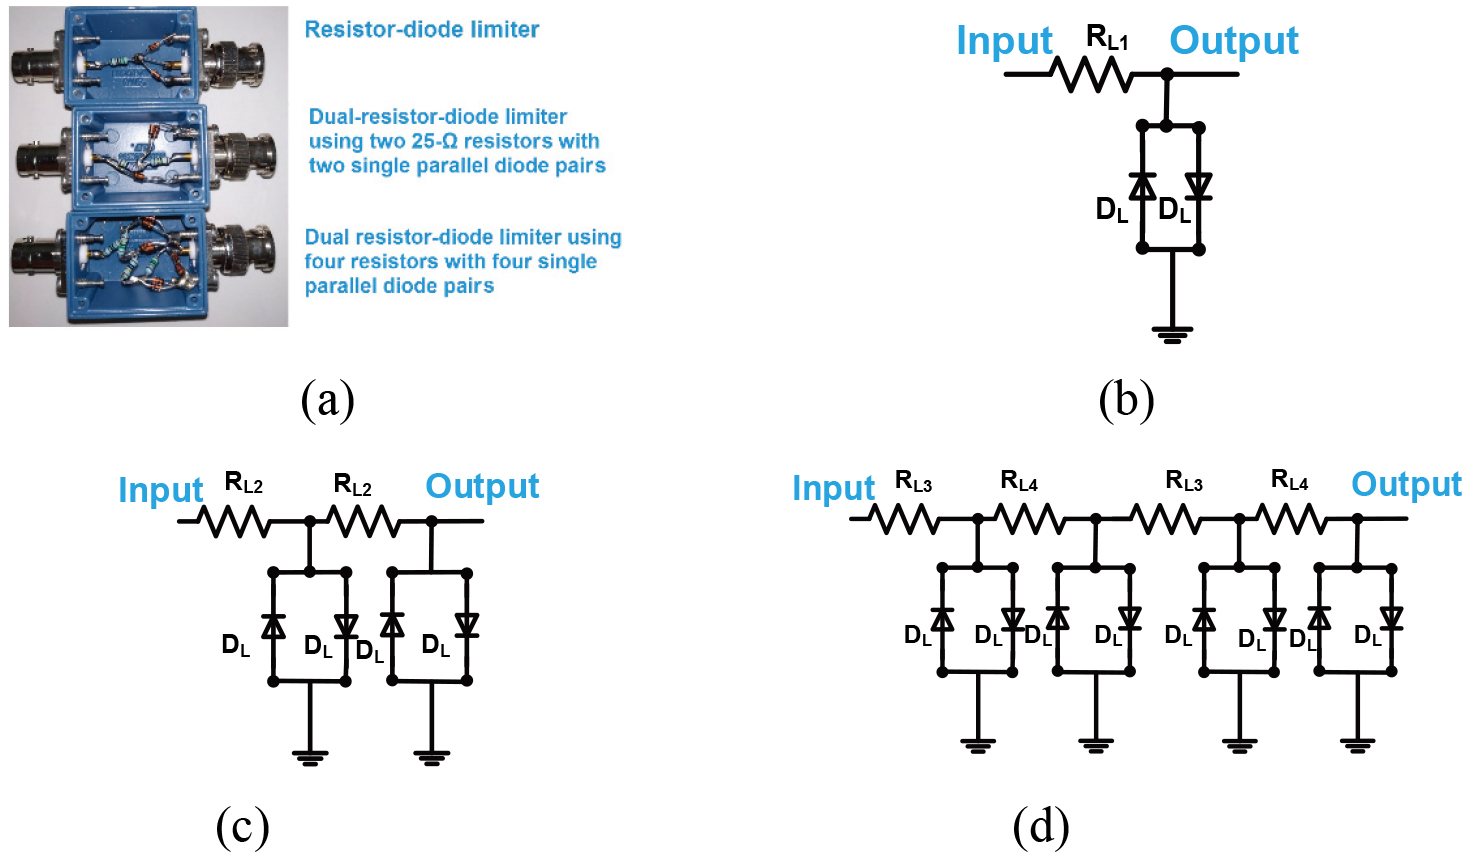 (a) Fabricated limiters; (b) resistor-diode limiter using a 50-Ω (RL⁢1) resistor with a diode (DL); (c) resistor-diode limiter using two 25-Ω (RL⁢2) resistors with two parallel-diodes (DL); (d) resistor-diode limiter using two 13-Ω (RL⁢3) resistors and two 12-Ω (RL⁢4) resistors with four parallel-diodes (DL).